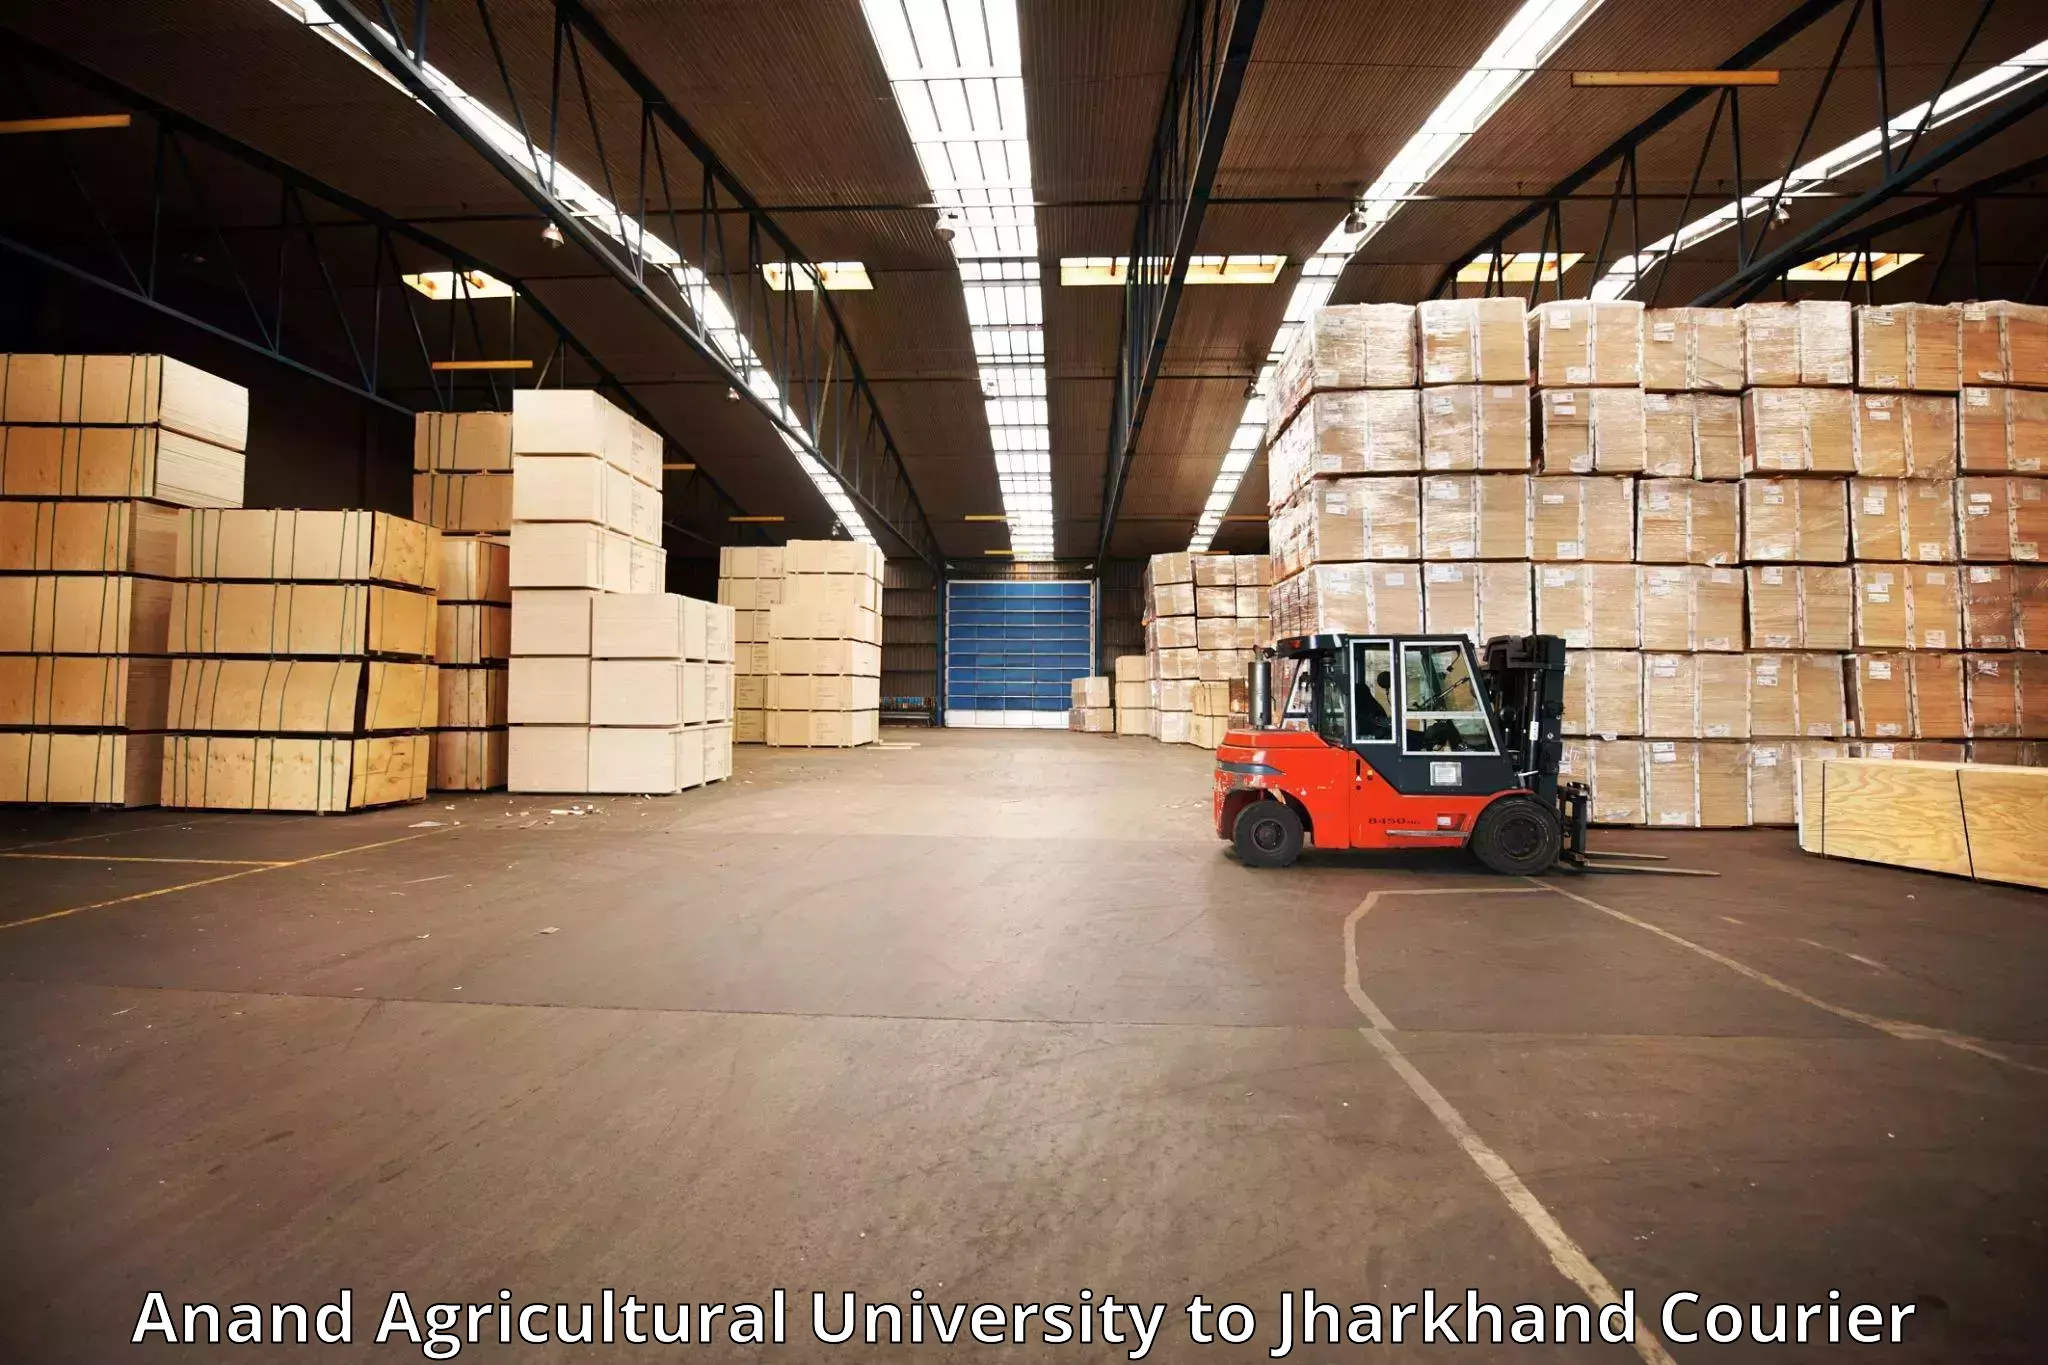 Baggage transport management Anand Agricultural University to Jharkhand